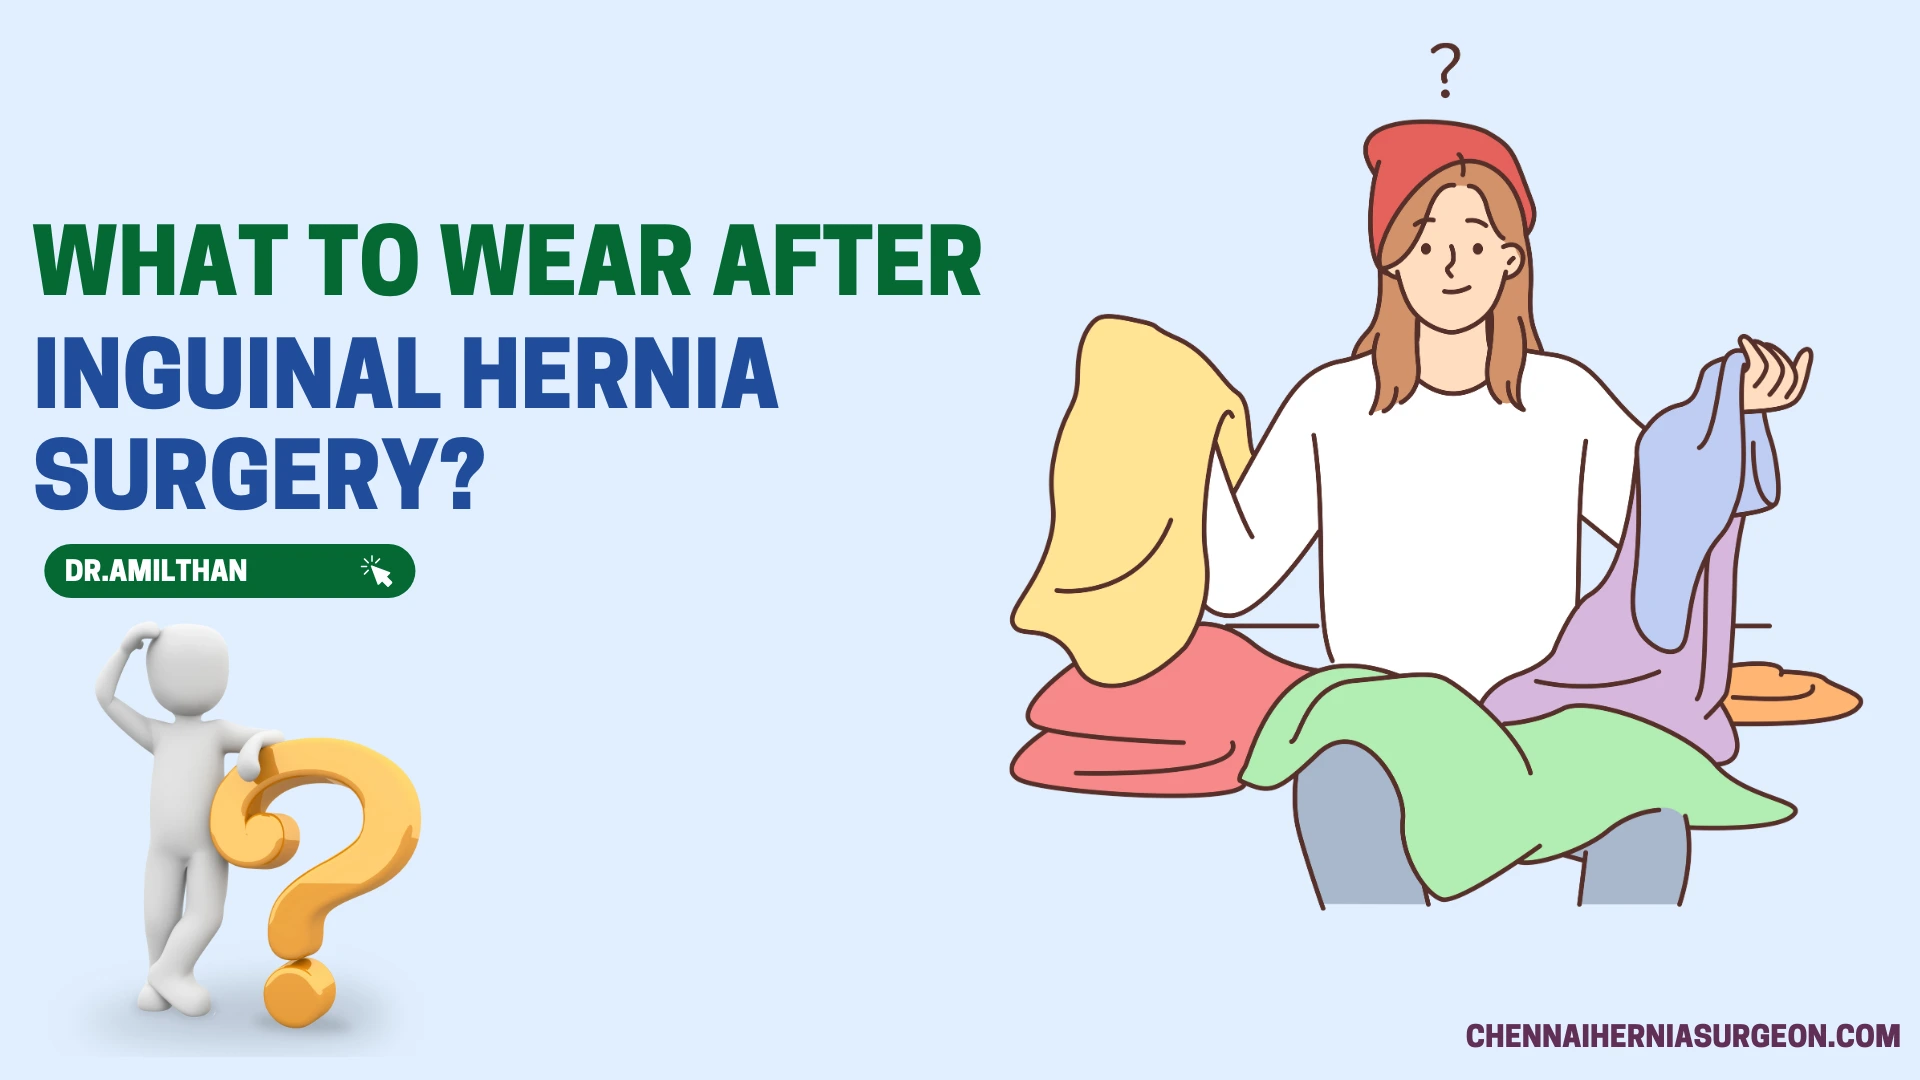 What to wear after Inguinal Hernia surgery